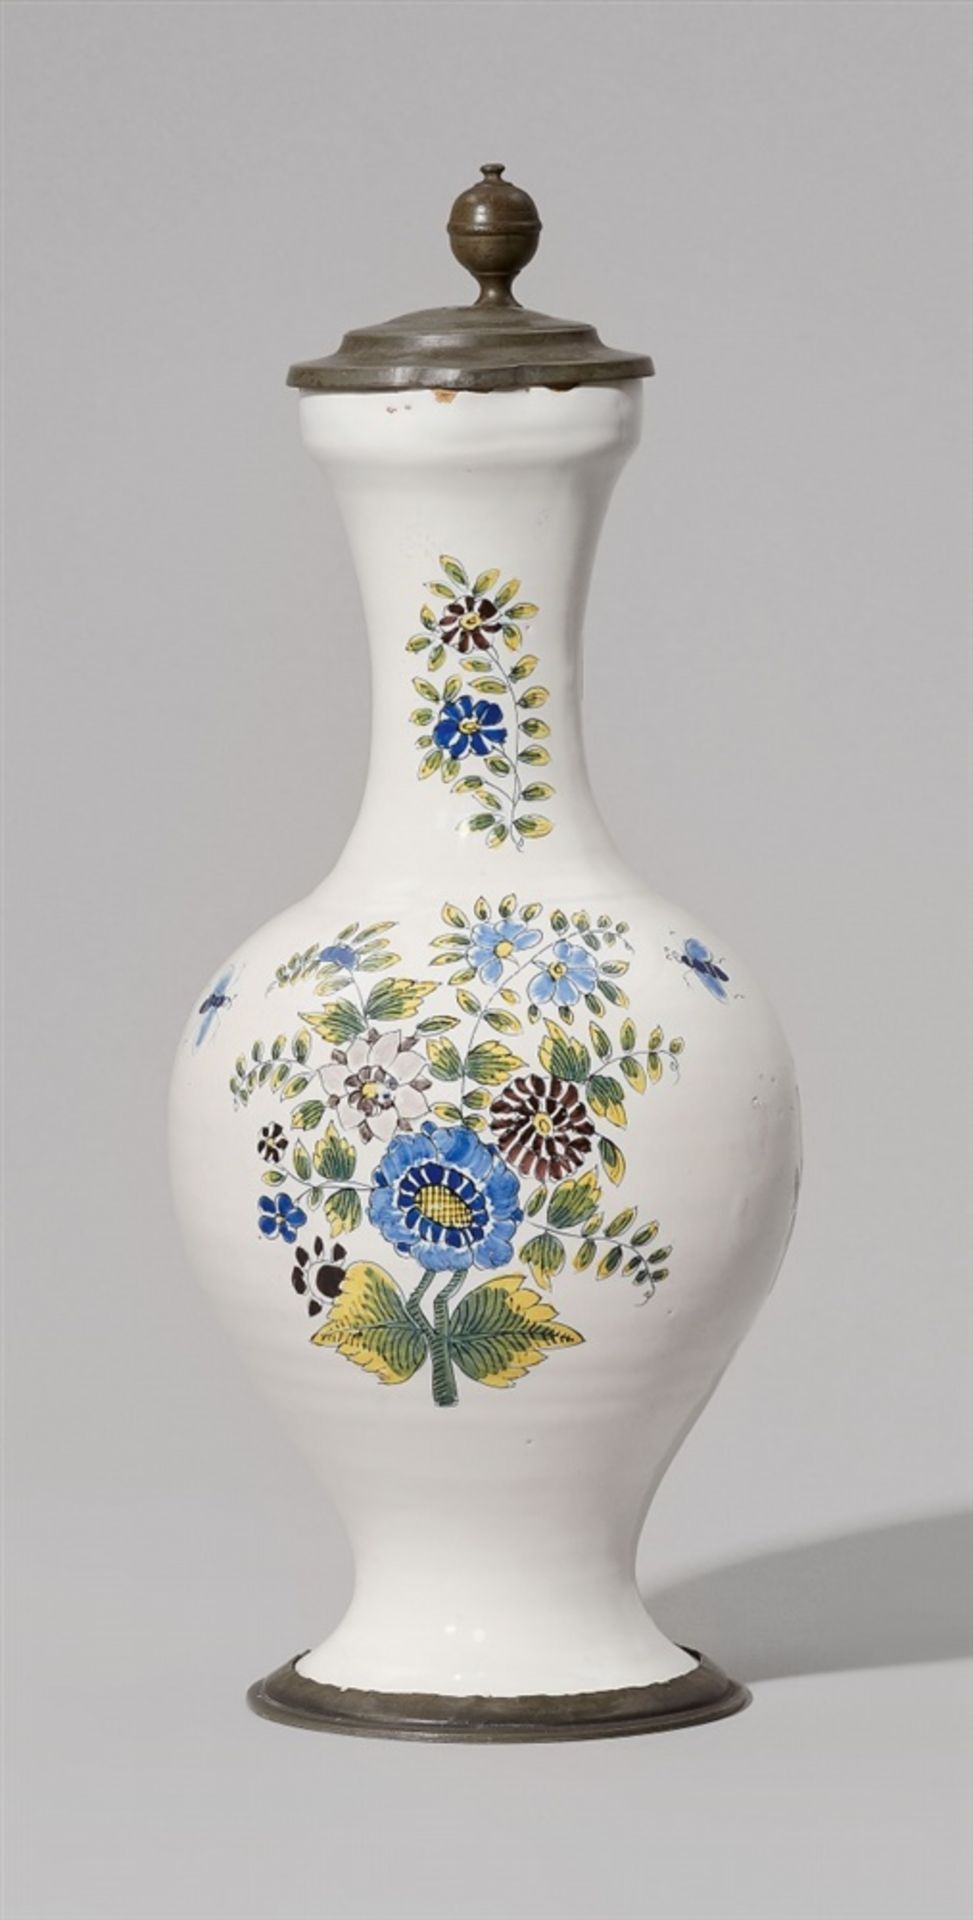 A Künersberg faience tankardDecorated to the display side with a bouquet of “indianische blumen” and